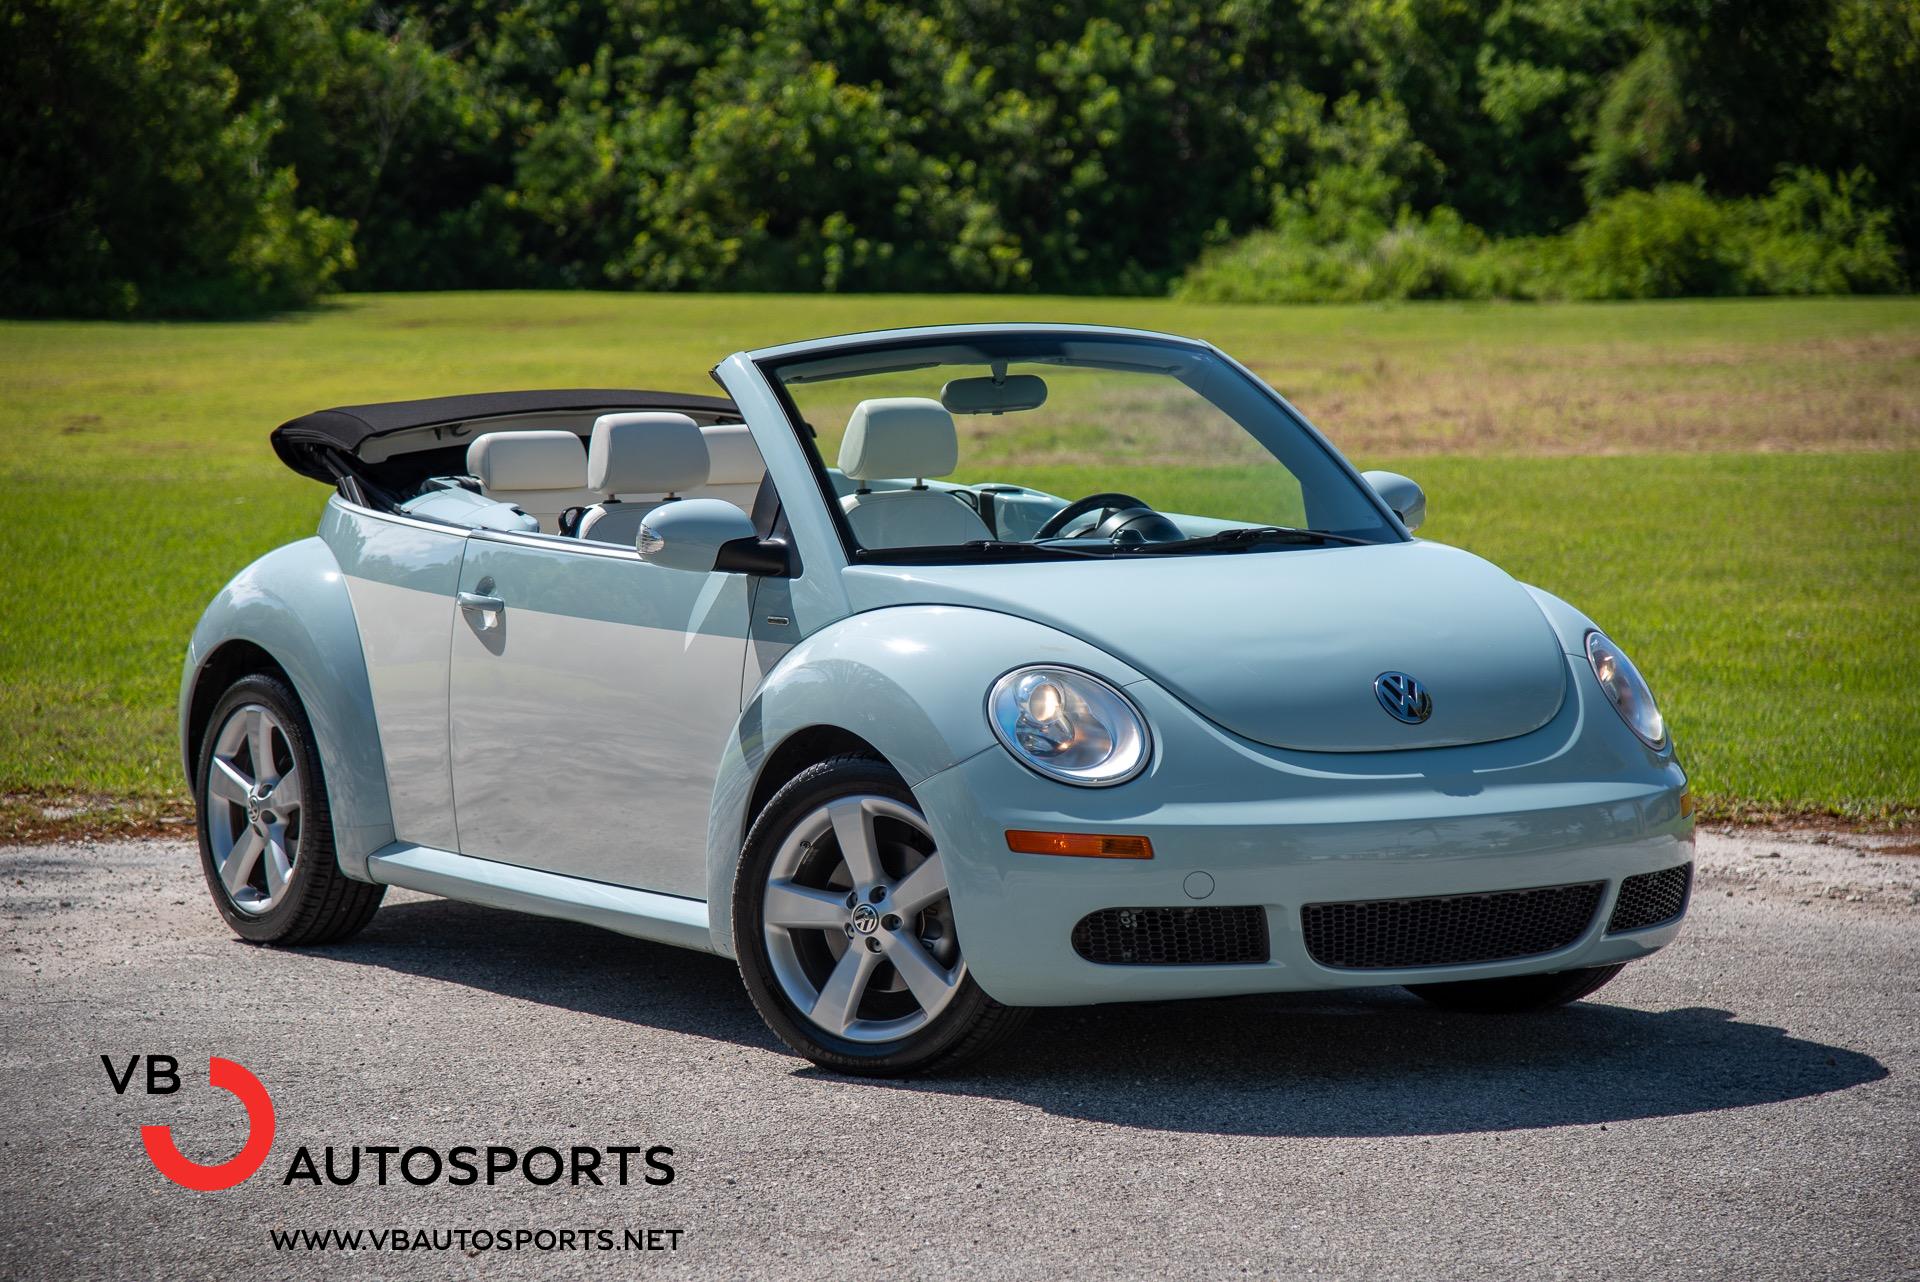 Pre Owned Volkswagen New Beetle Convertible Final Edition For Sale Sold VB Autosports